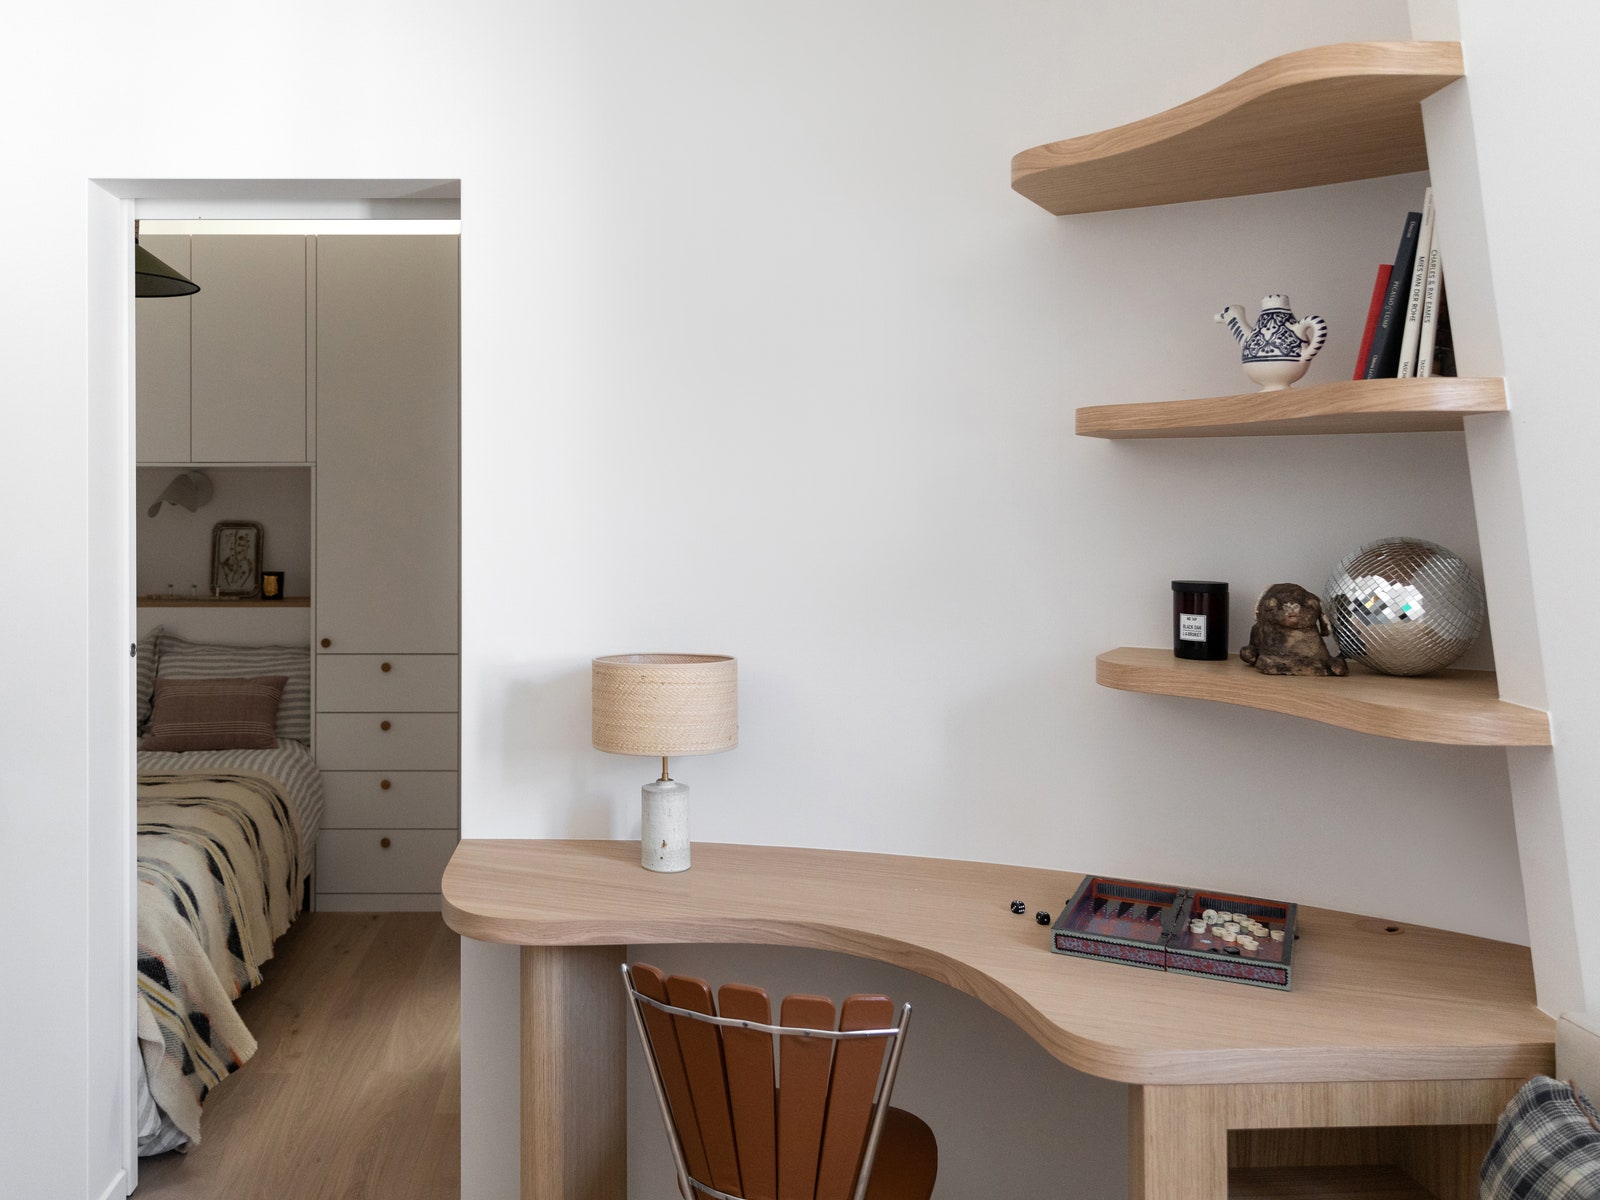 At Just 183 Square Feet, This Paris Apartment Is Smart and Functional